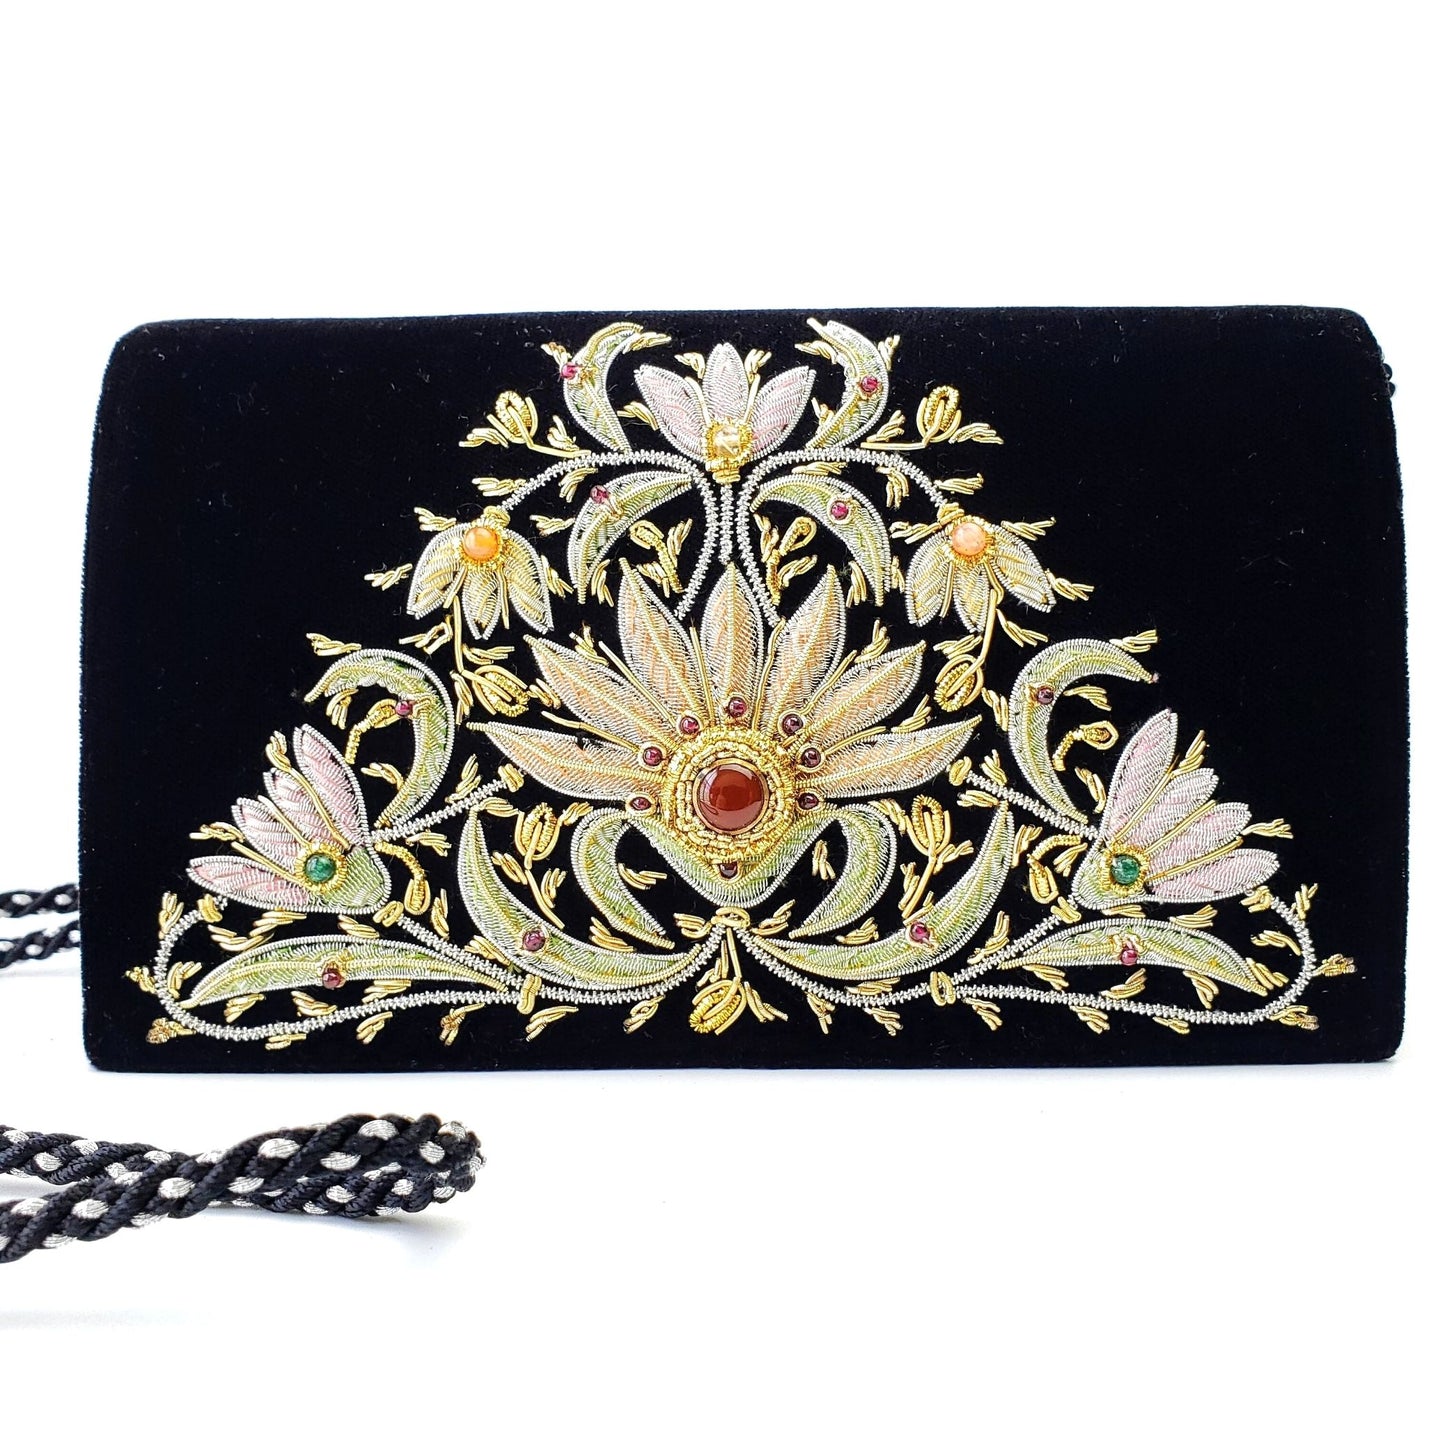 Luxury hand embroidered black velvet evening bag with pastel colored flowers and inlaid with jasper and garnets, zardozi purse. 